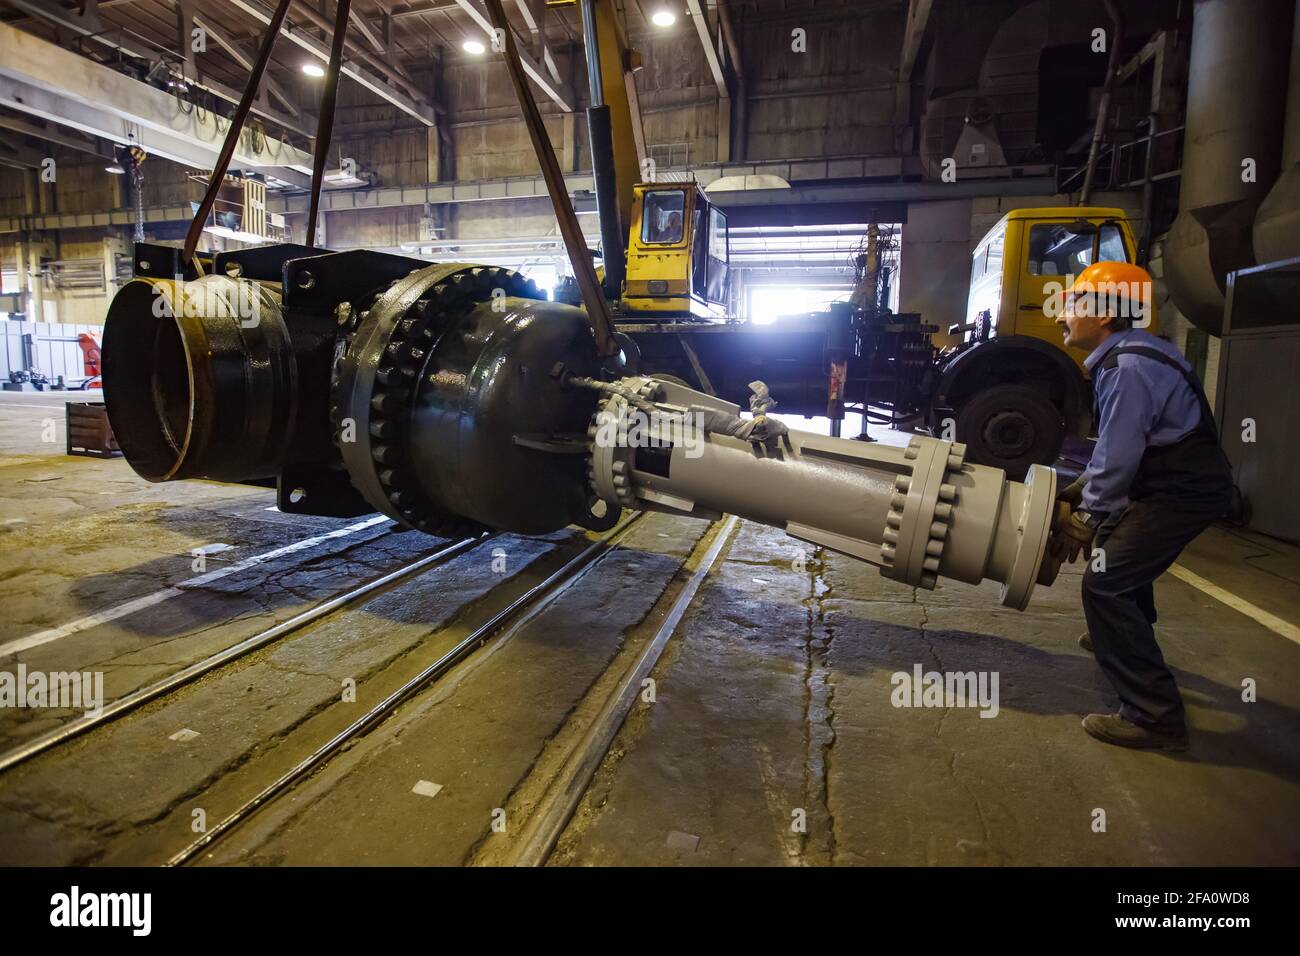 Worker lifts giant shut-off valve by mobile crane.Oil and gas industry equipment production plant workshop.Ust-Kamenogorsk, Kazakhstan. Stock Photo